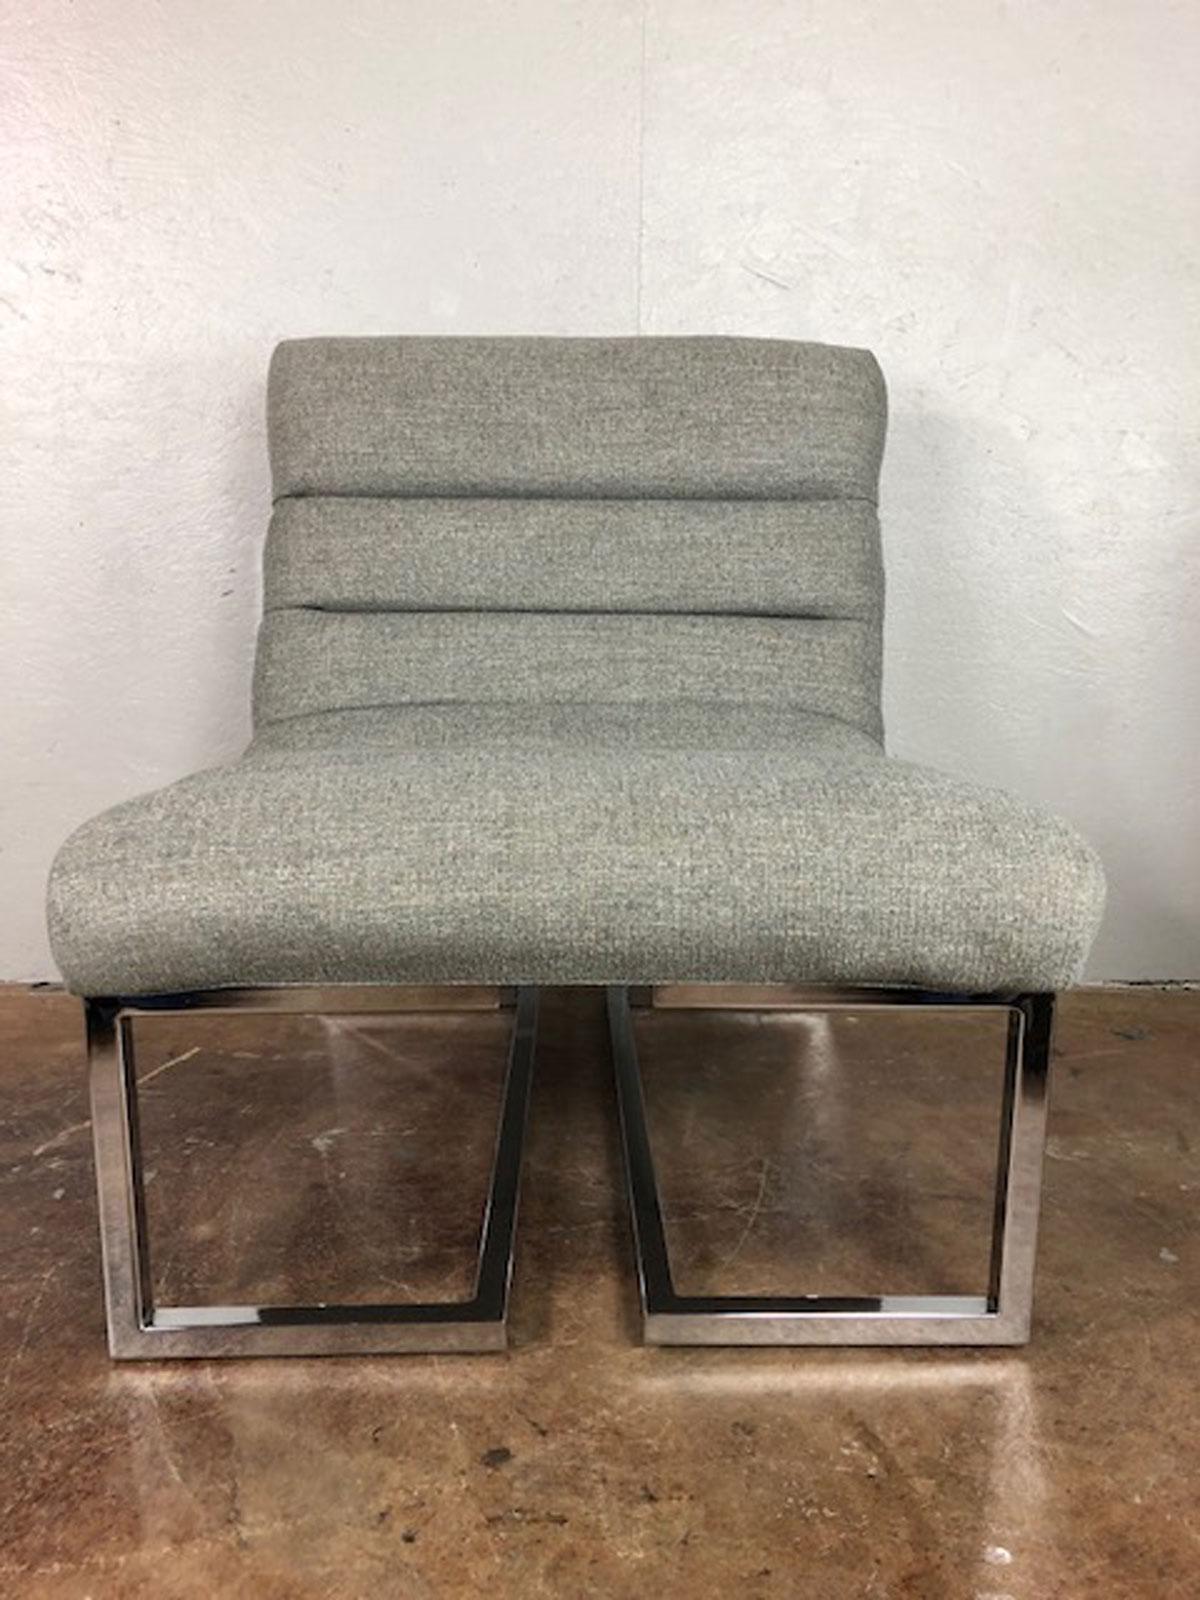 Swaim Design Lounge Chairs In Excellent Condition For Sale In Phoenix, AZ